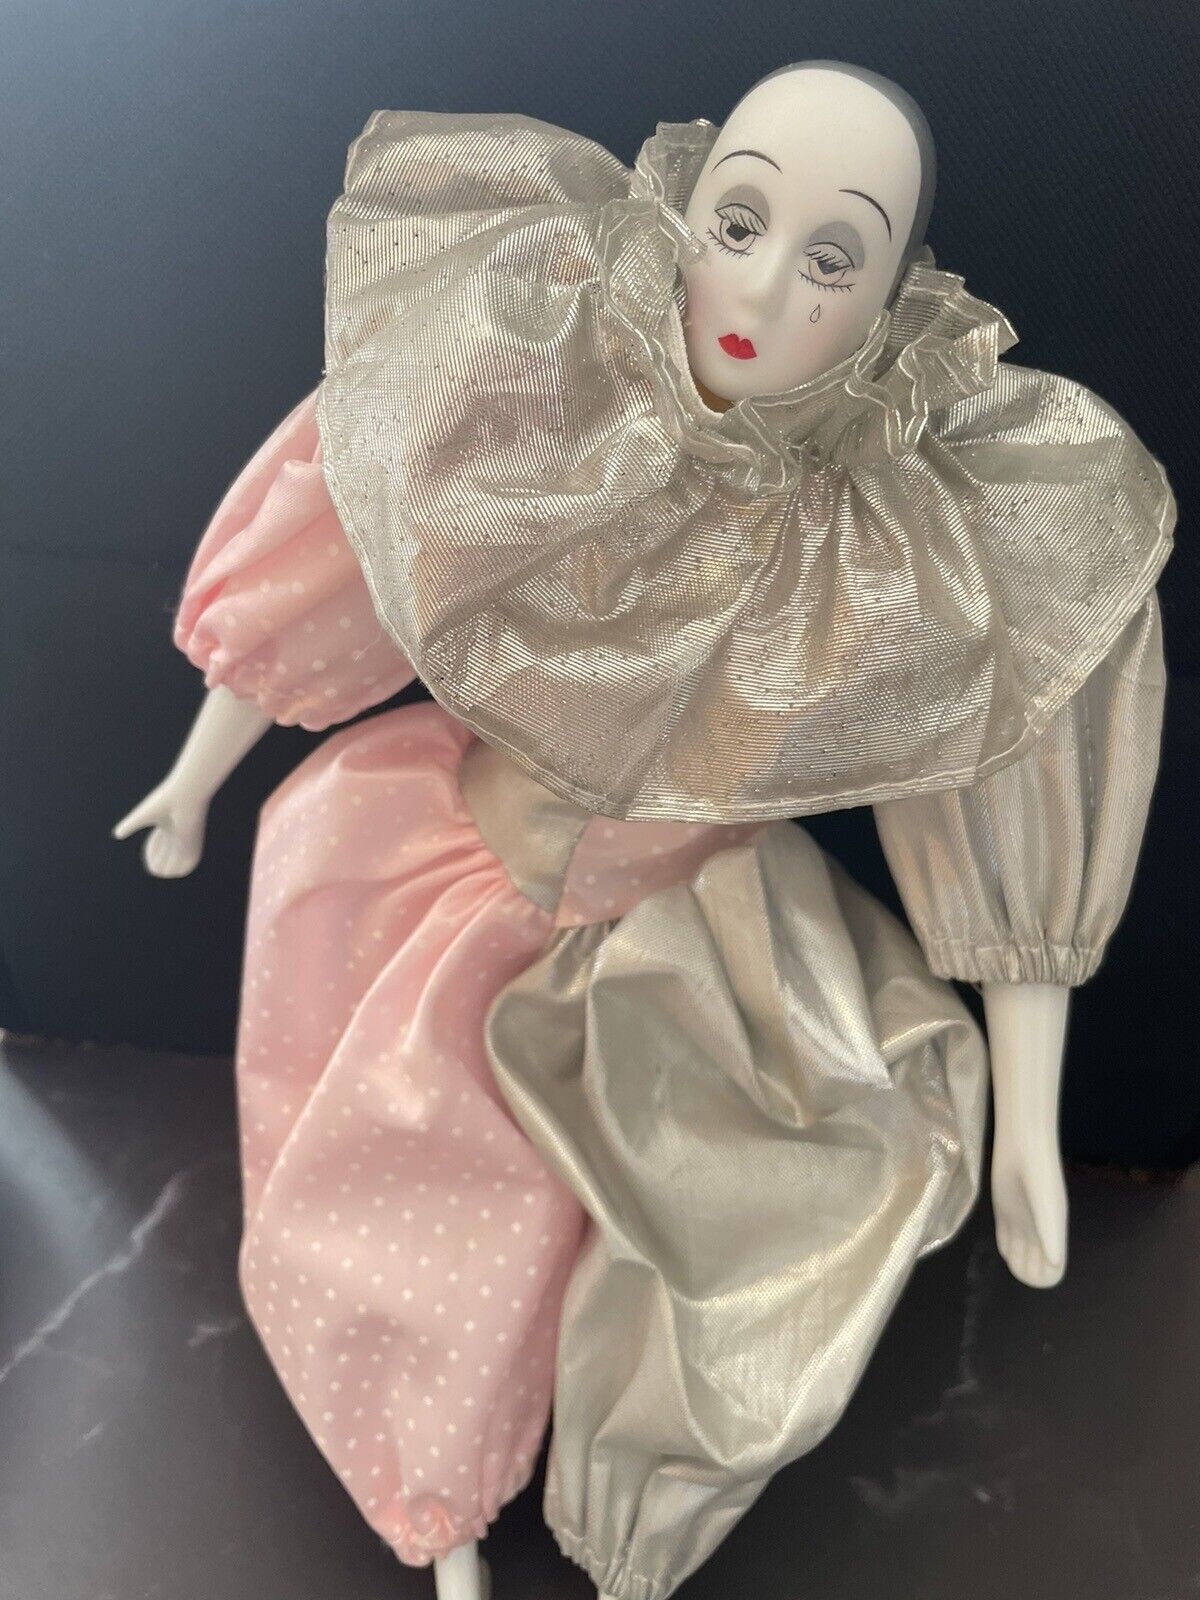 Harlequin Jester Clown Pink & Gray Porcelain Doll, 11” Tall & 4” Wide